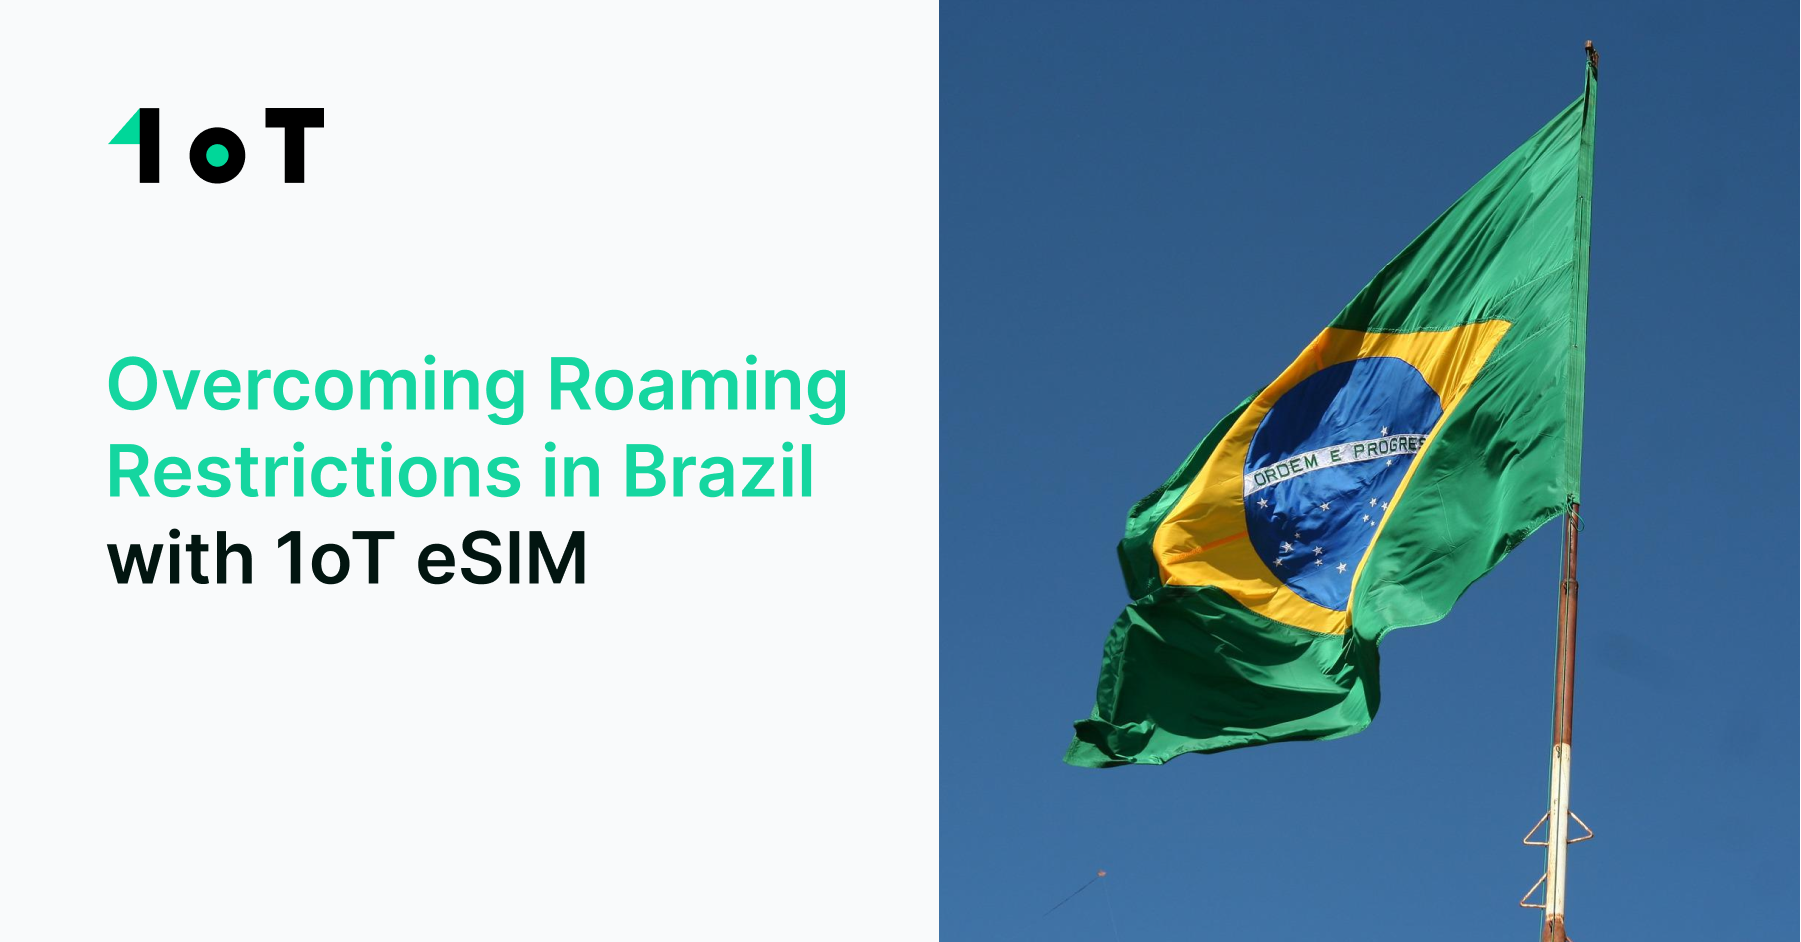 Article cover image for Overcoming Roaming Restrictions in Brazil with 1oT eSIM